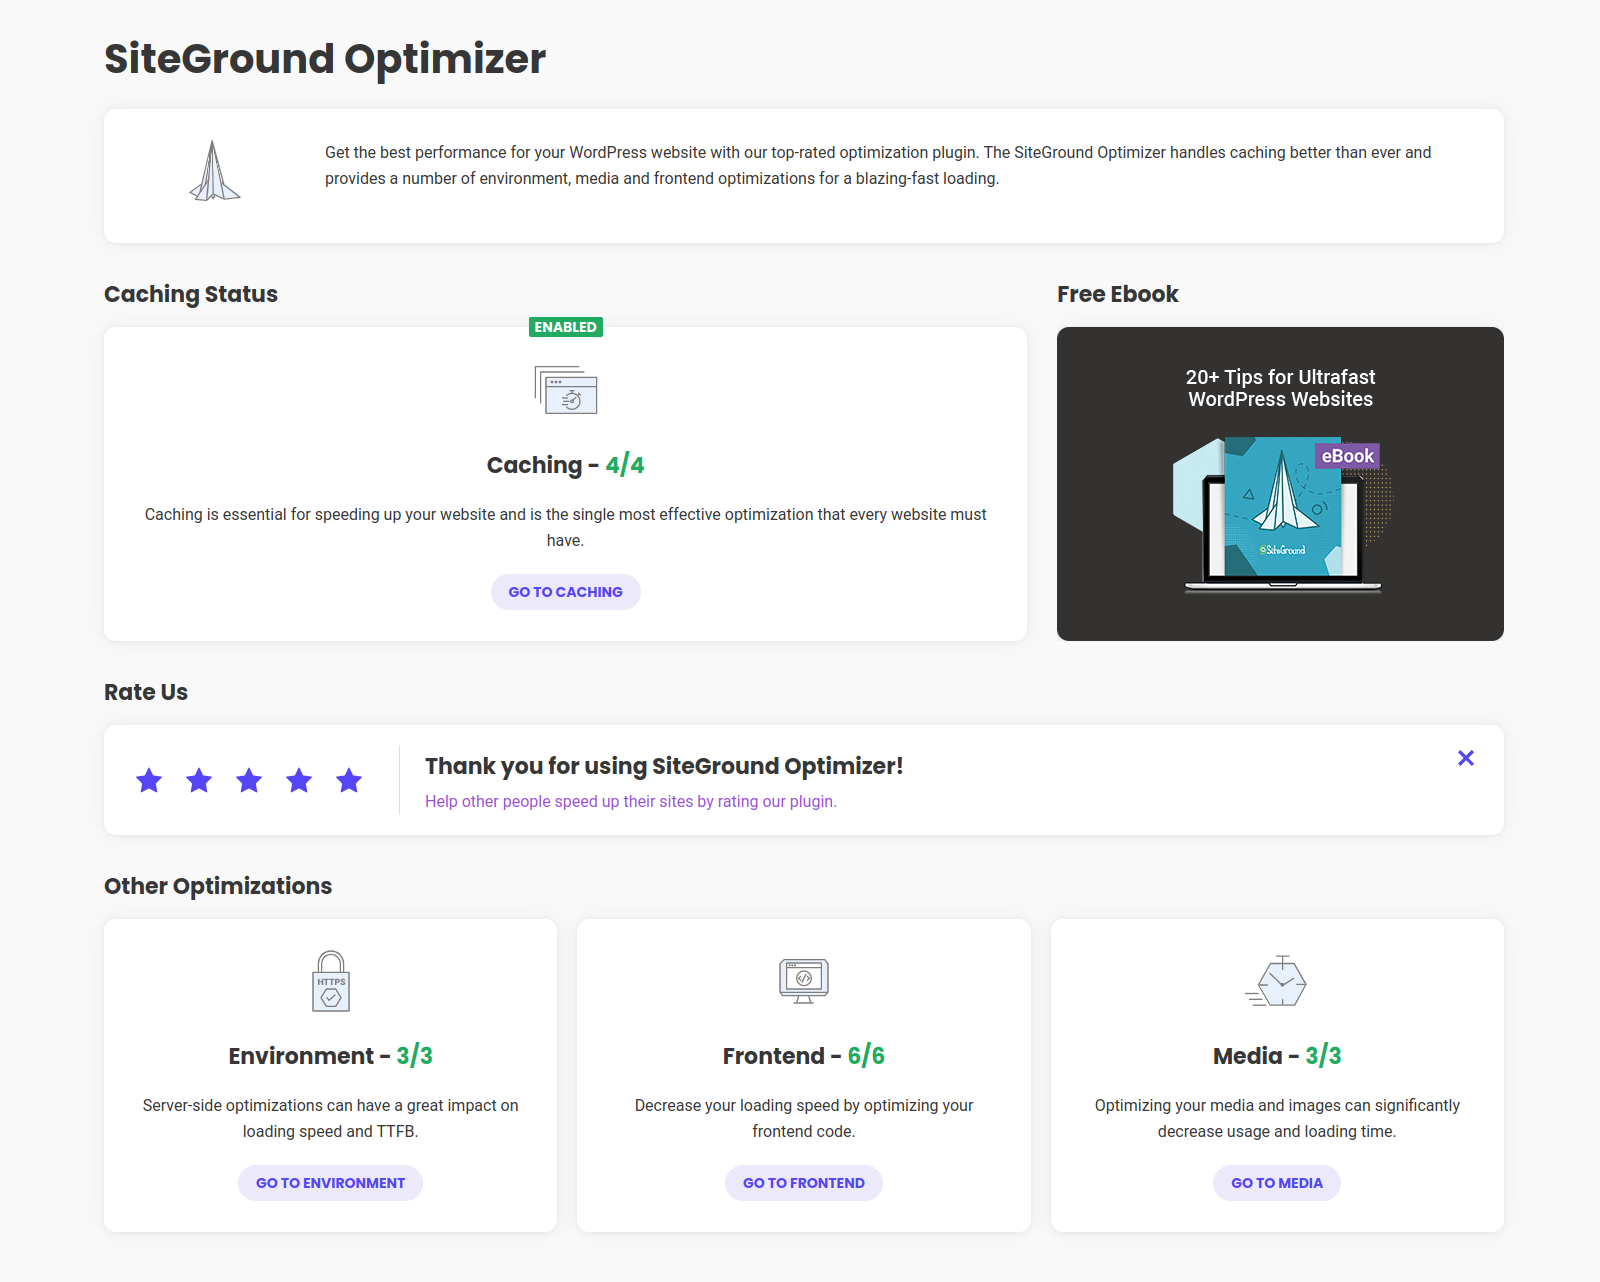 The SiteGround Optimizer Dashboard Page offers a quick look at the current optimization status of your website, along with shortcuts to the relevant optimization pages.